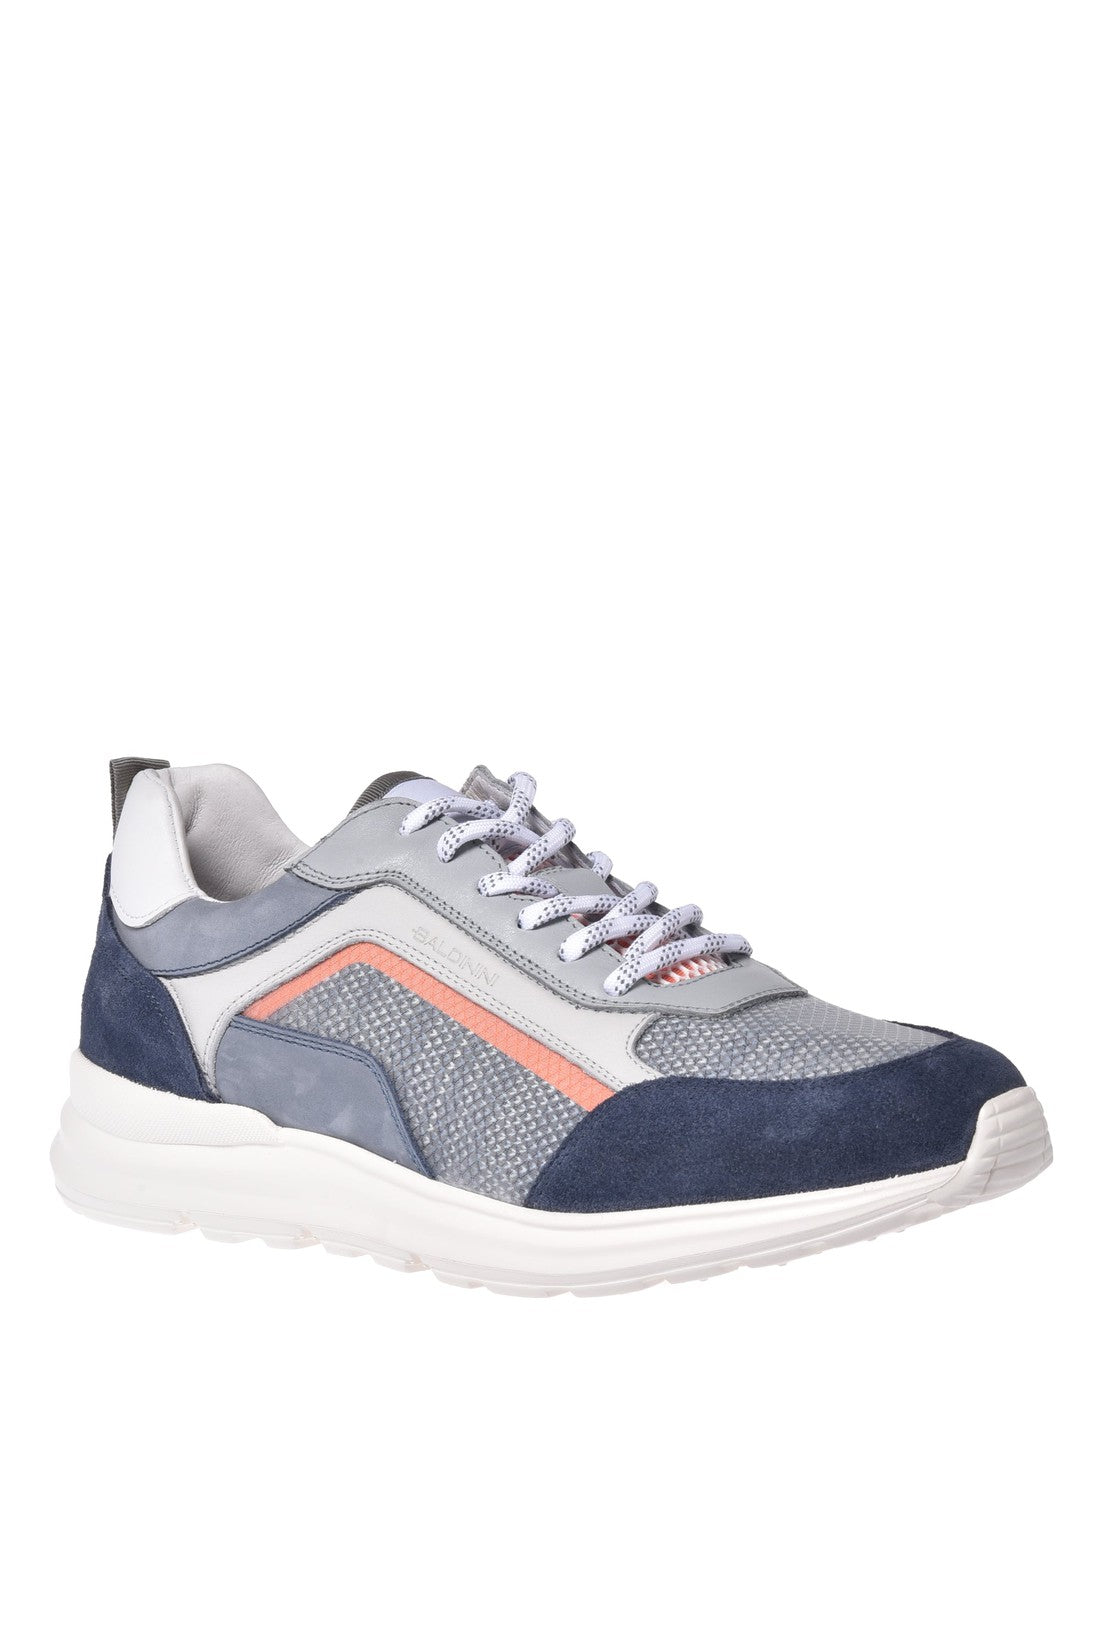 Sneaker in denim leather and fabric